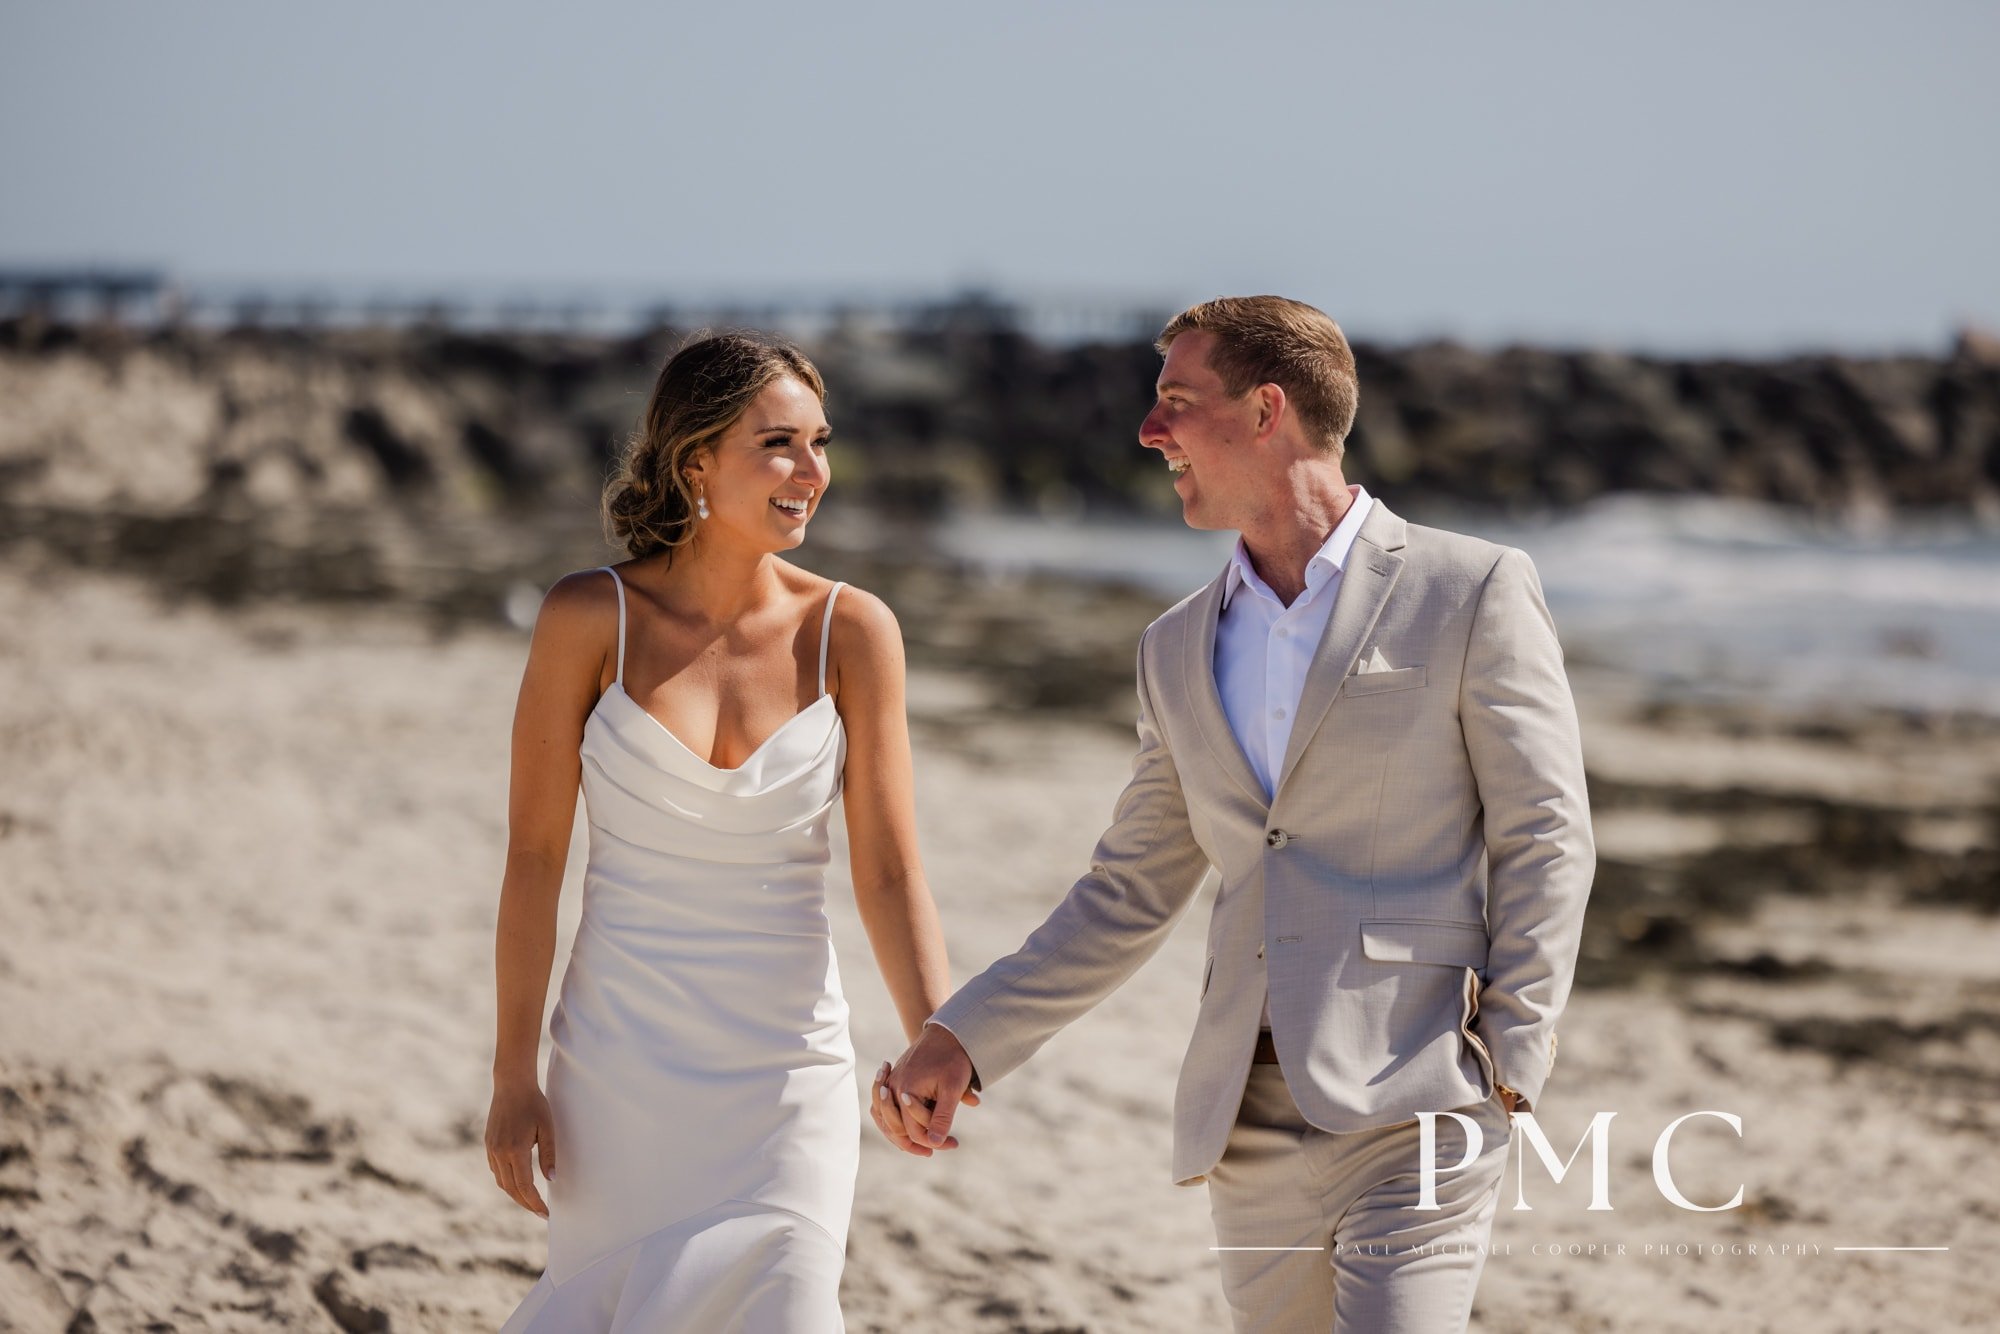 A bride and groom hold hands and smile as they walk on the beach in Mission Bay.